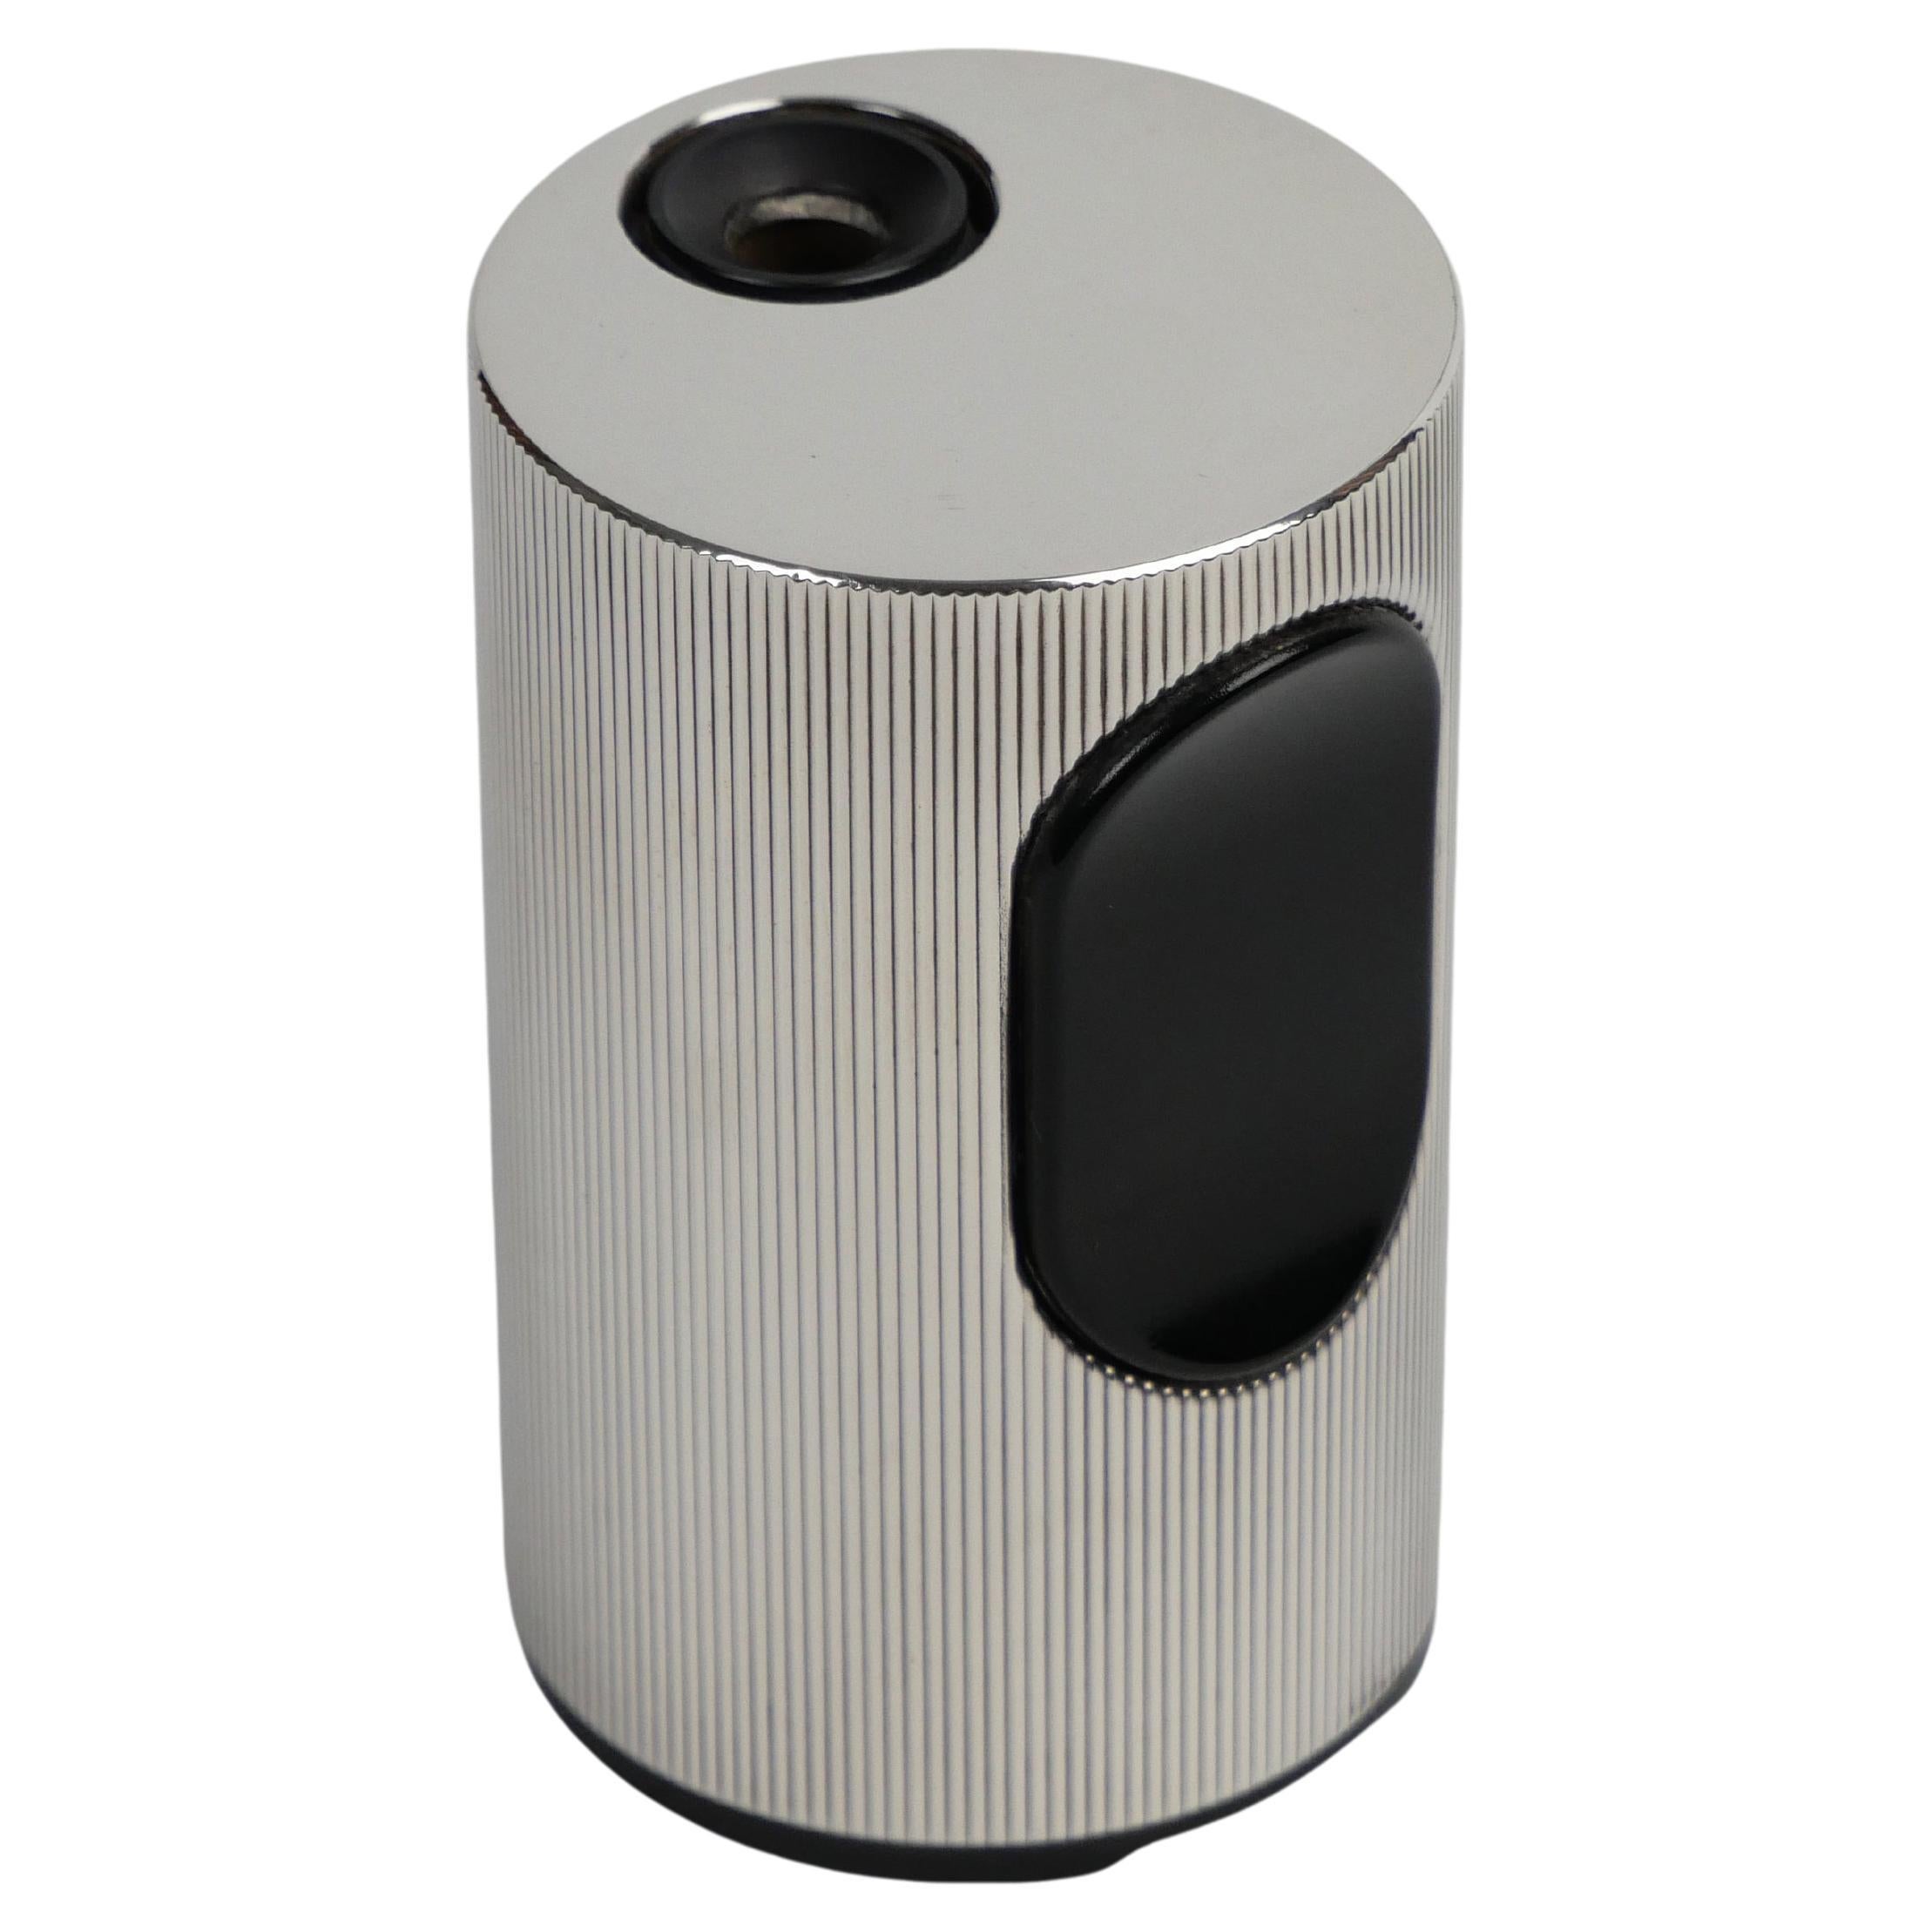 snemand Wedge Bowling Dieter Rams for Braun, T2 Table Lighter, 1968. Silver Finished, Rare,  Excellent at 1stDibs